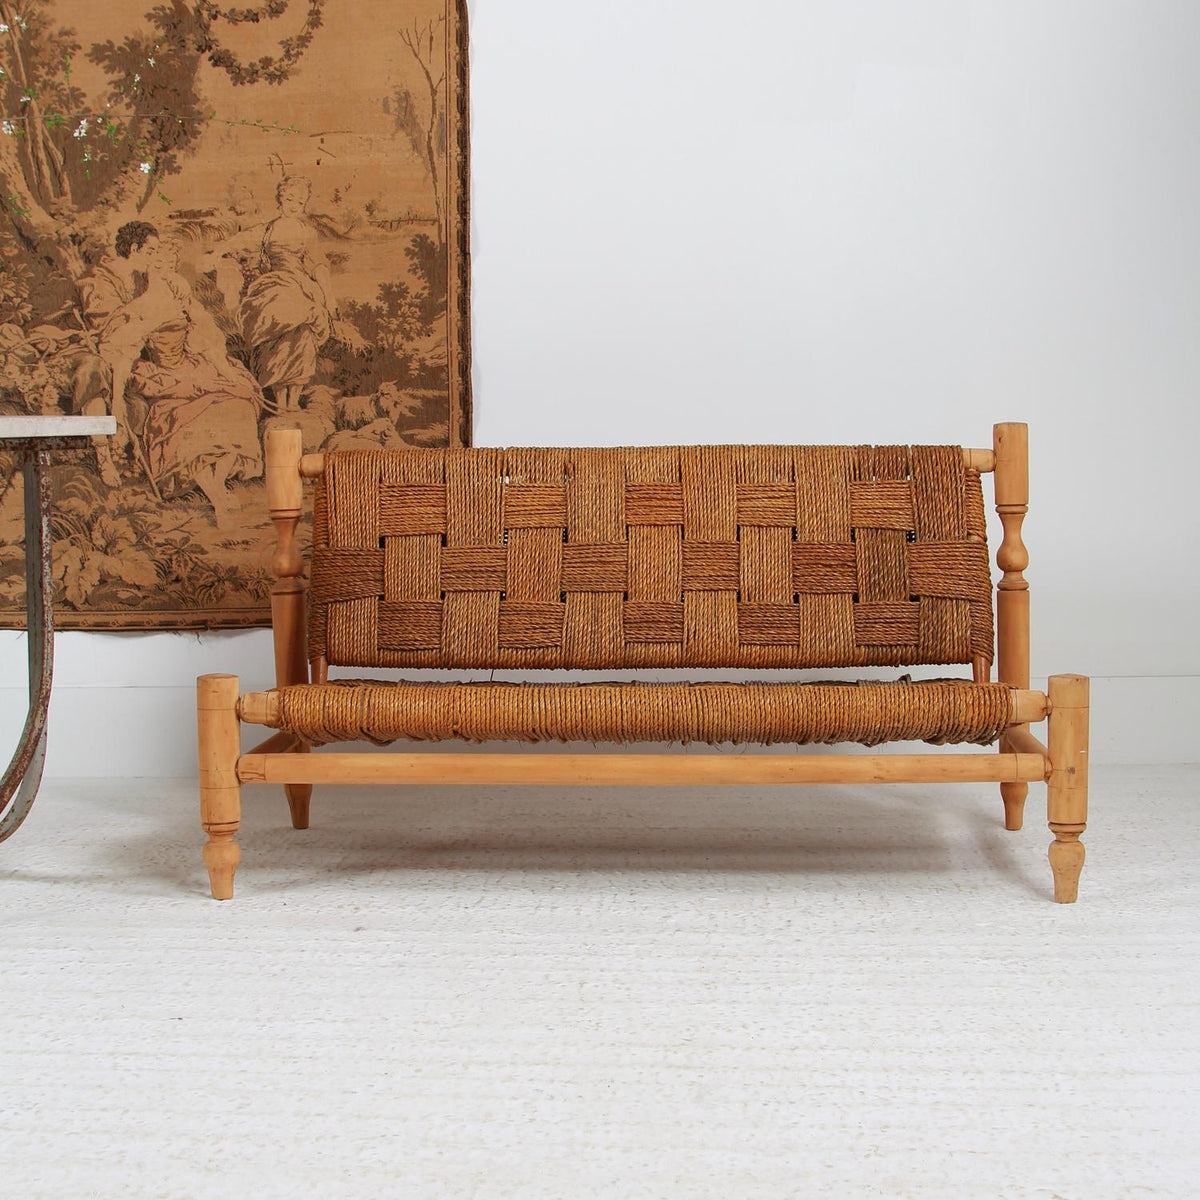 A Wonderful 1950s Rope Sofa by Adrien Audoux and Frida Minet